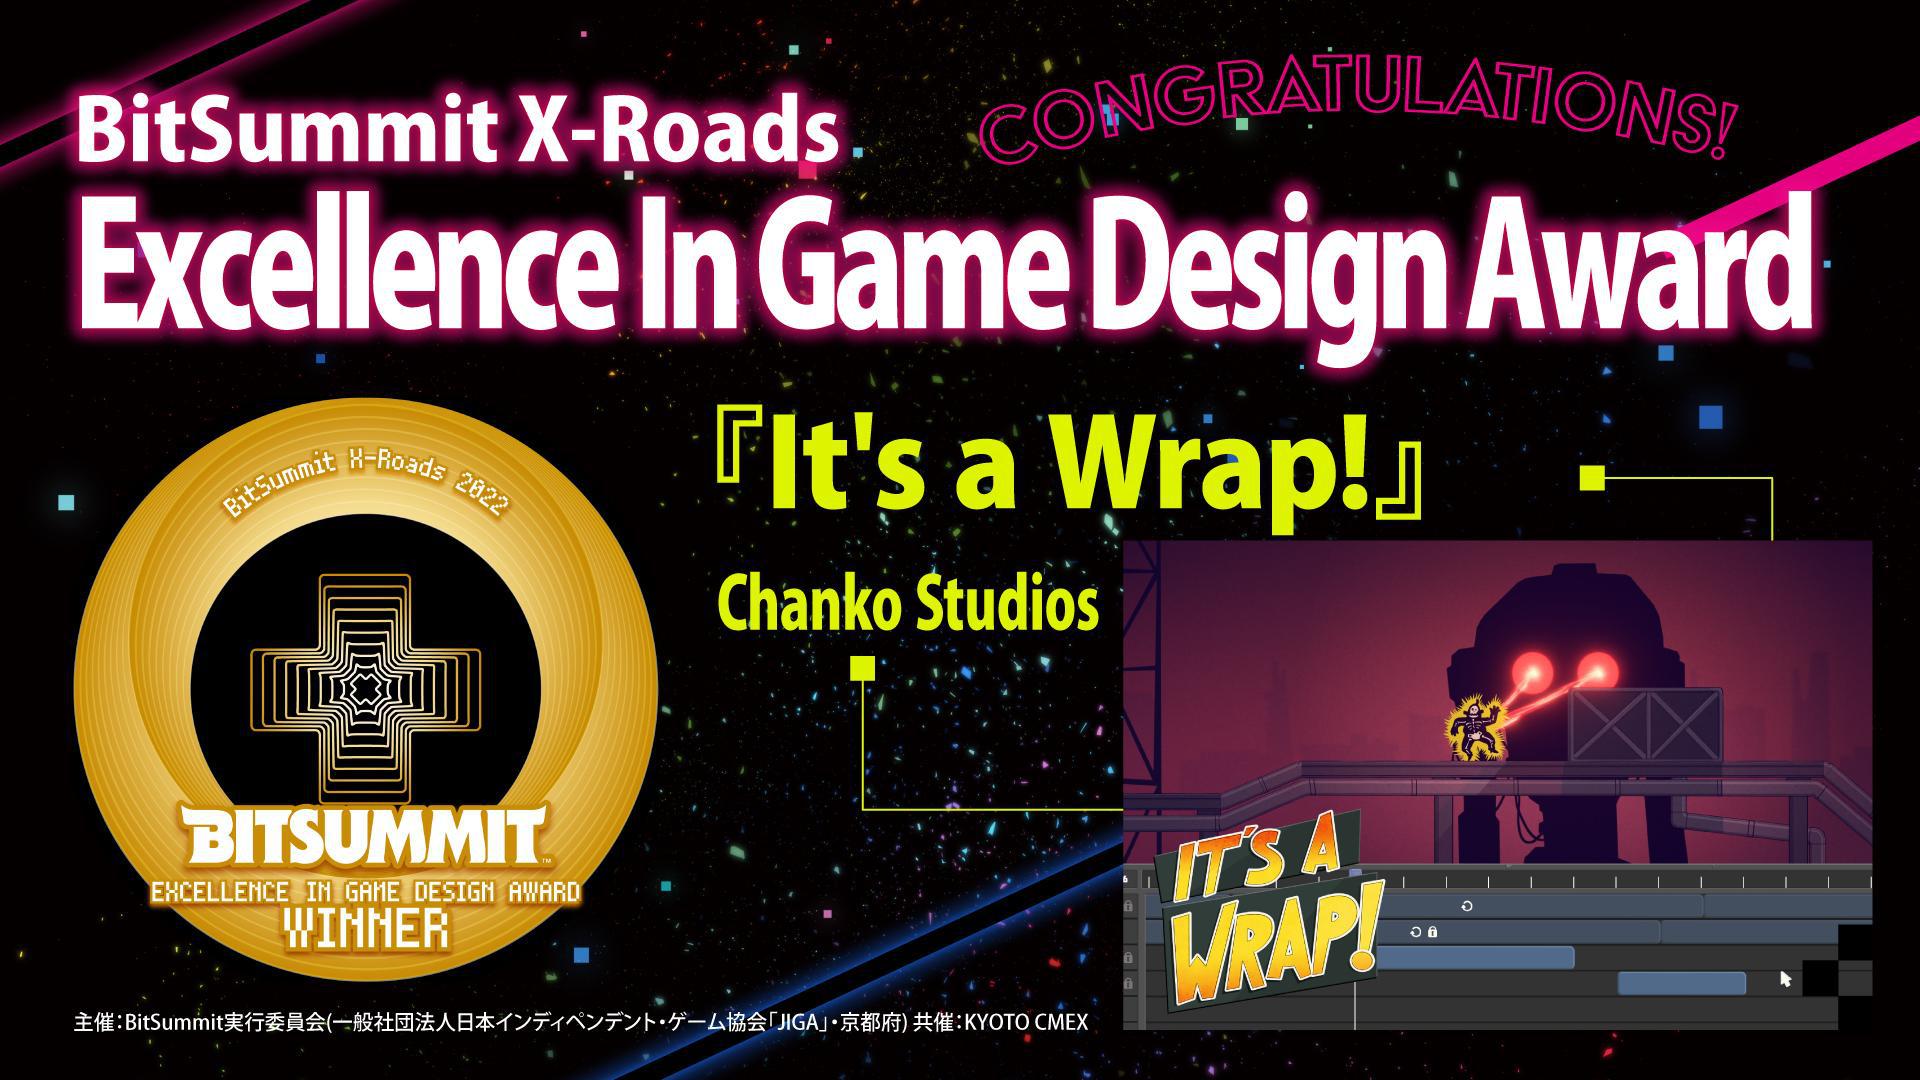 EXCELLENCE IN GAME DESIGN AWARD / ゲーム・デザイン最優秀賞